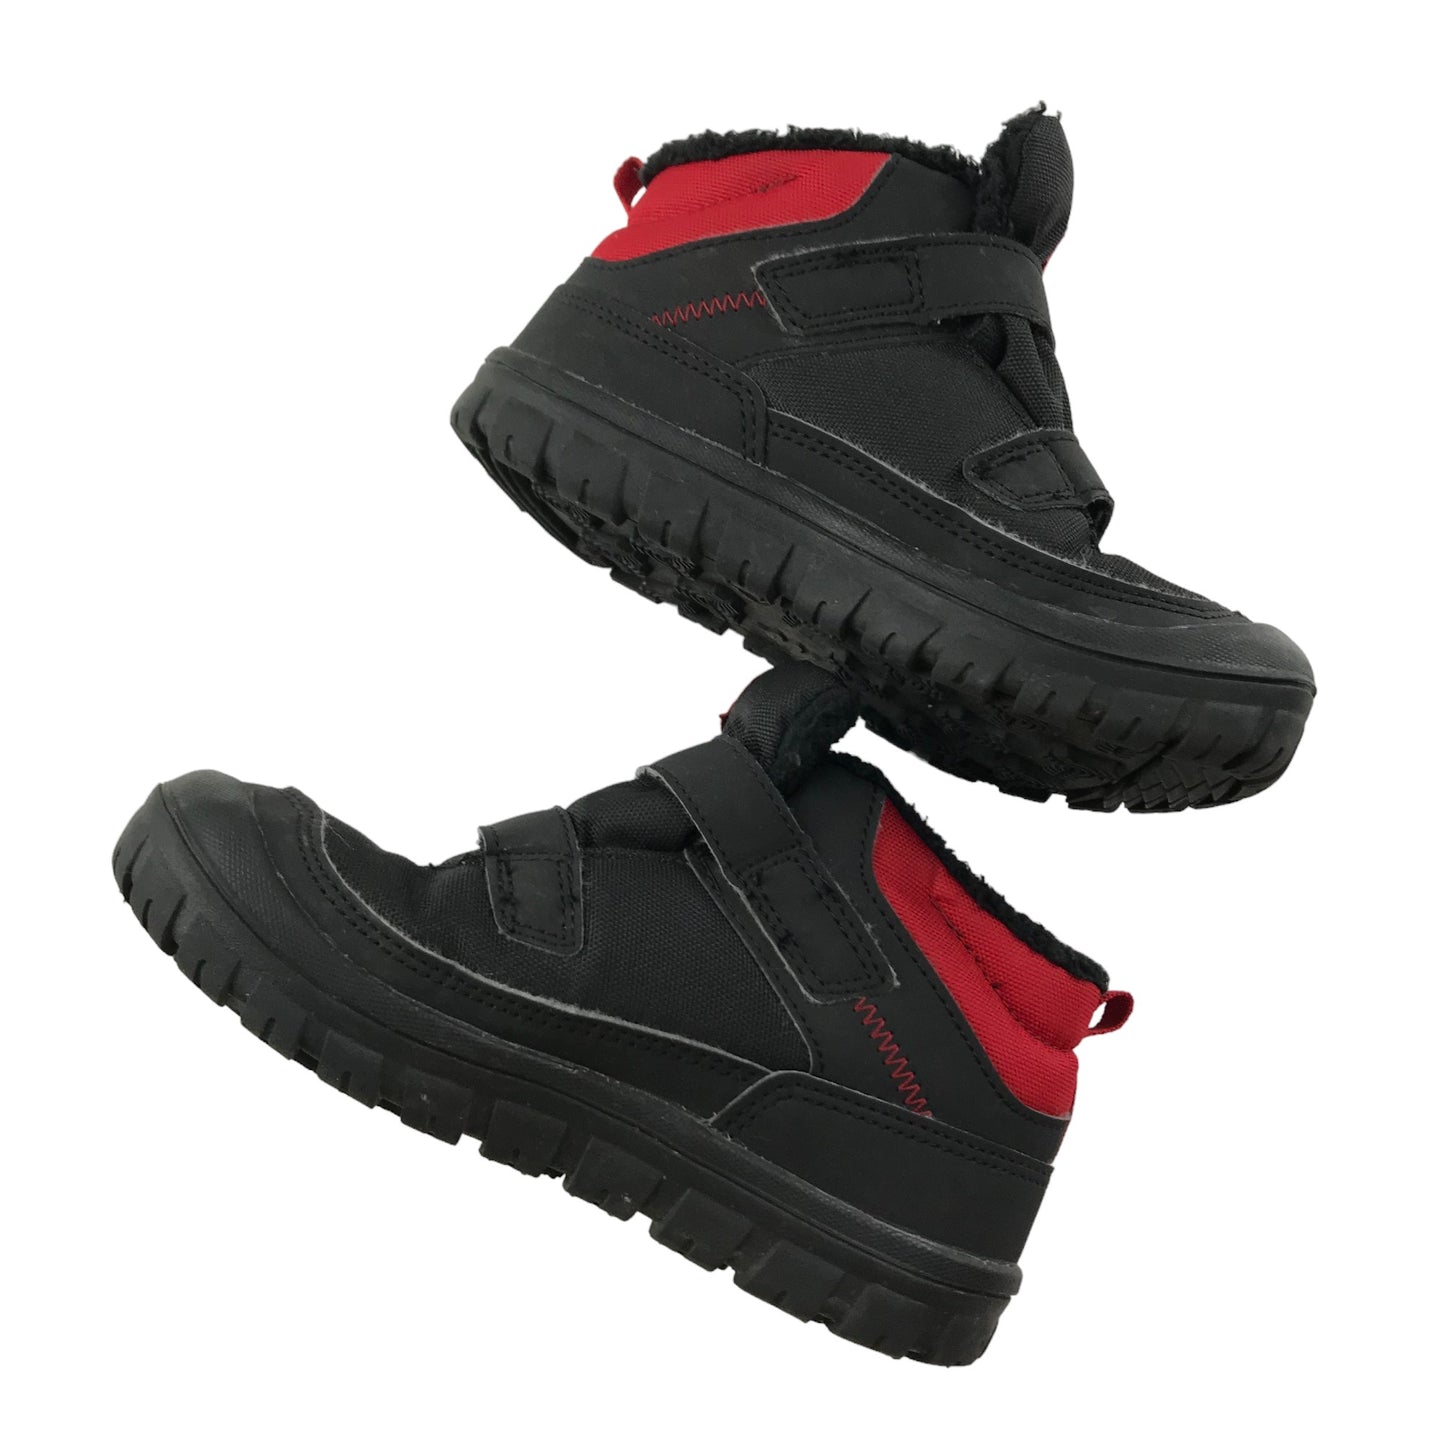 Decathlon Walking Boots Shoe Size 11-12 junior Black and Red Waterproof with Laces